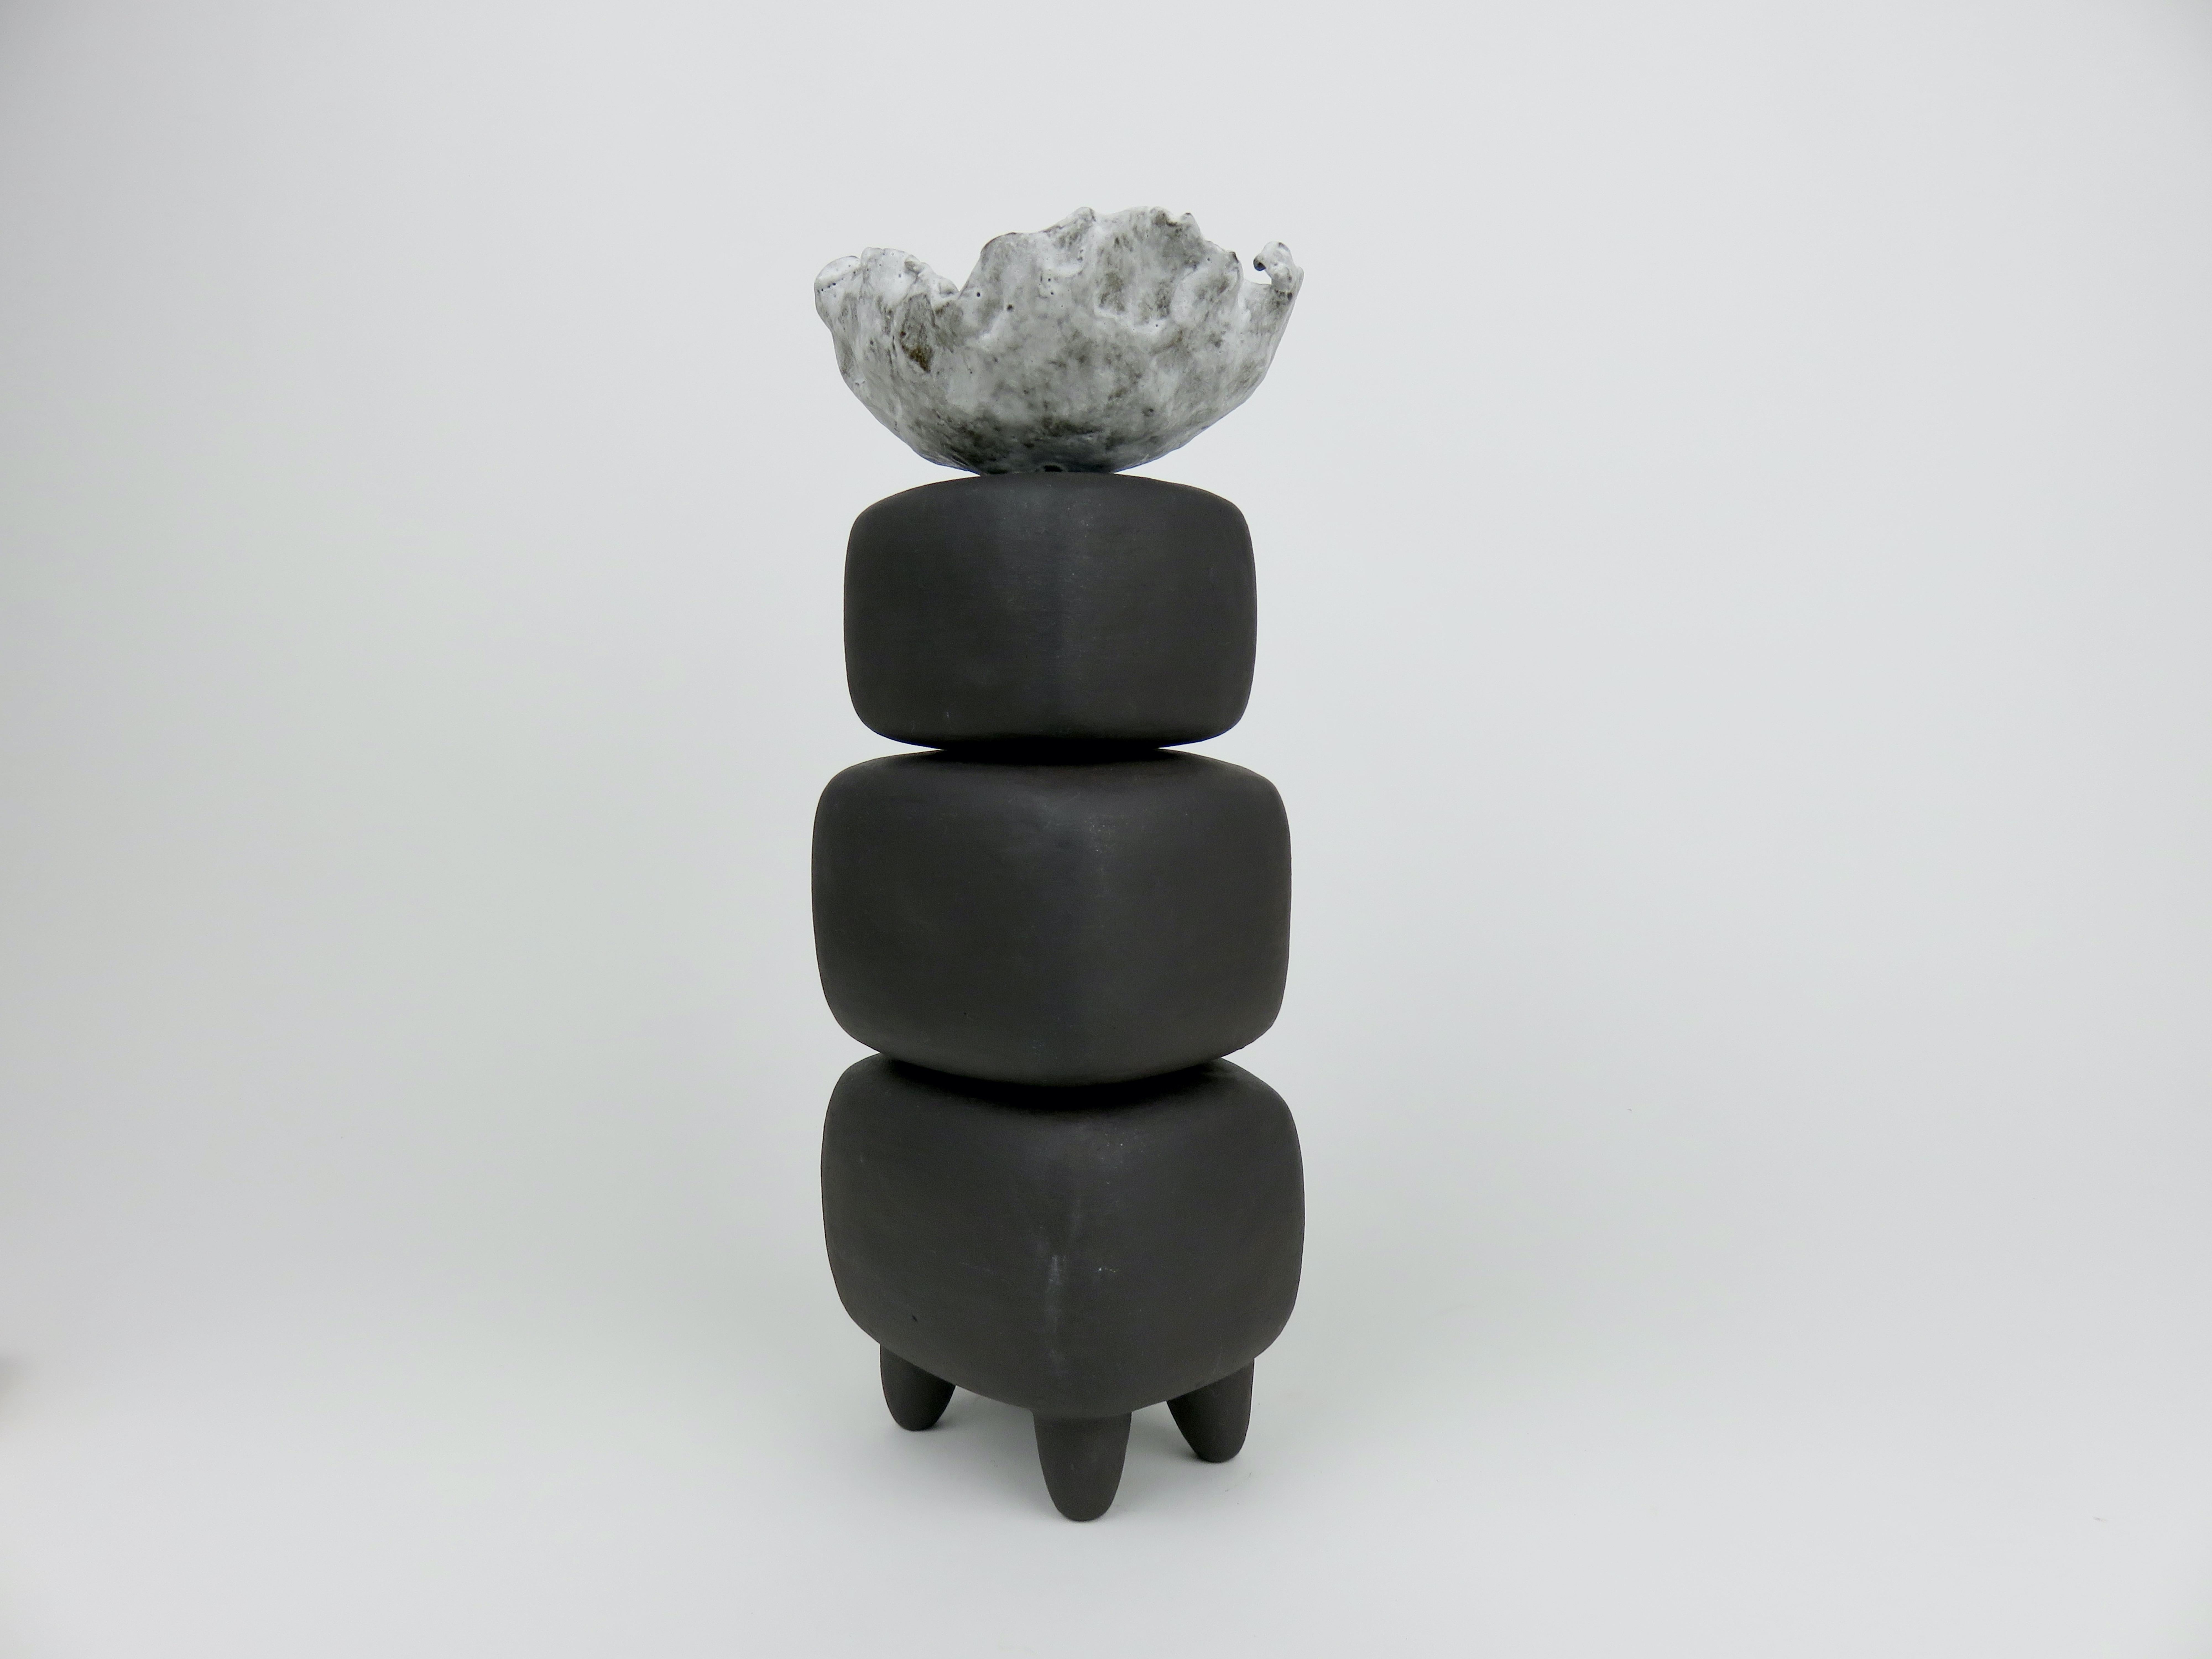 Hand-Crafted Hand Built Ceramic Sculpture, Dark Brown Stacked Cubes with White Crinkled Top